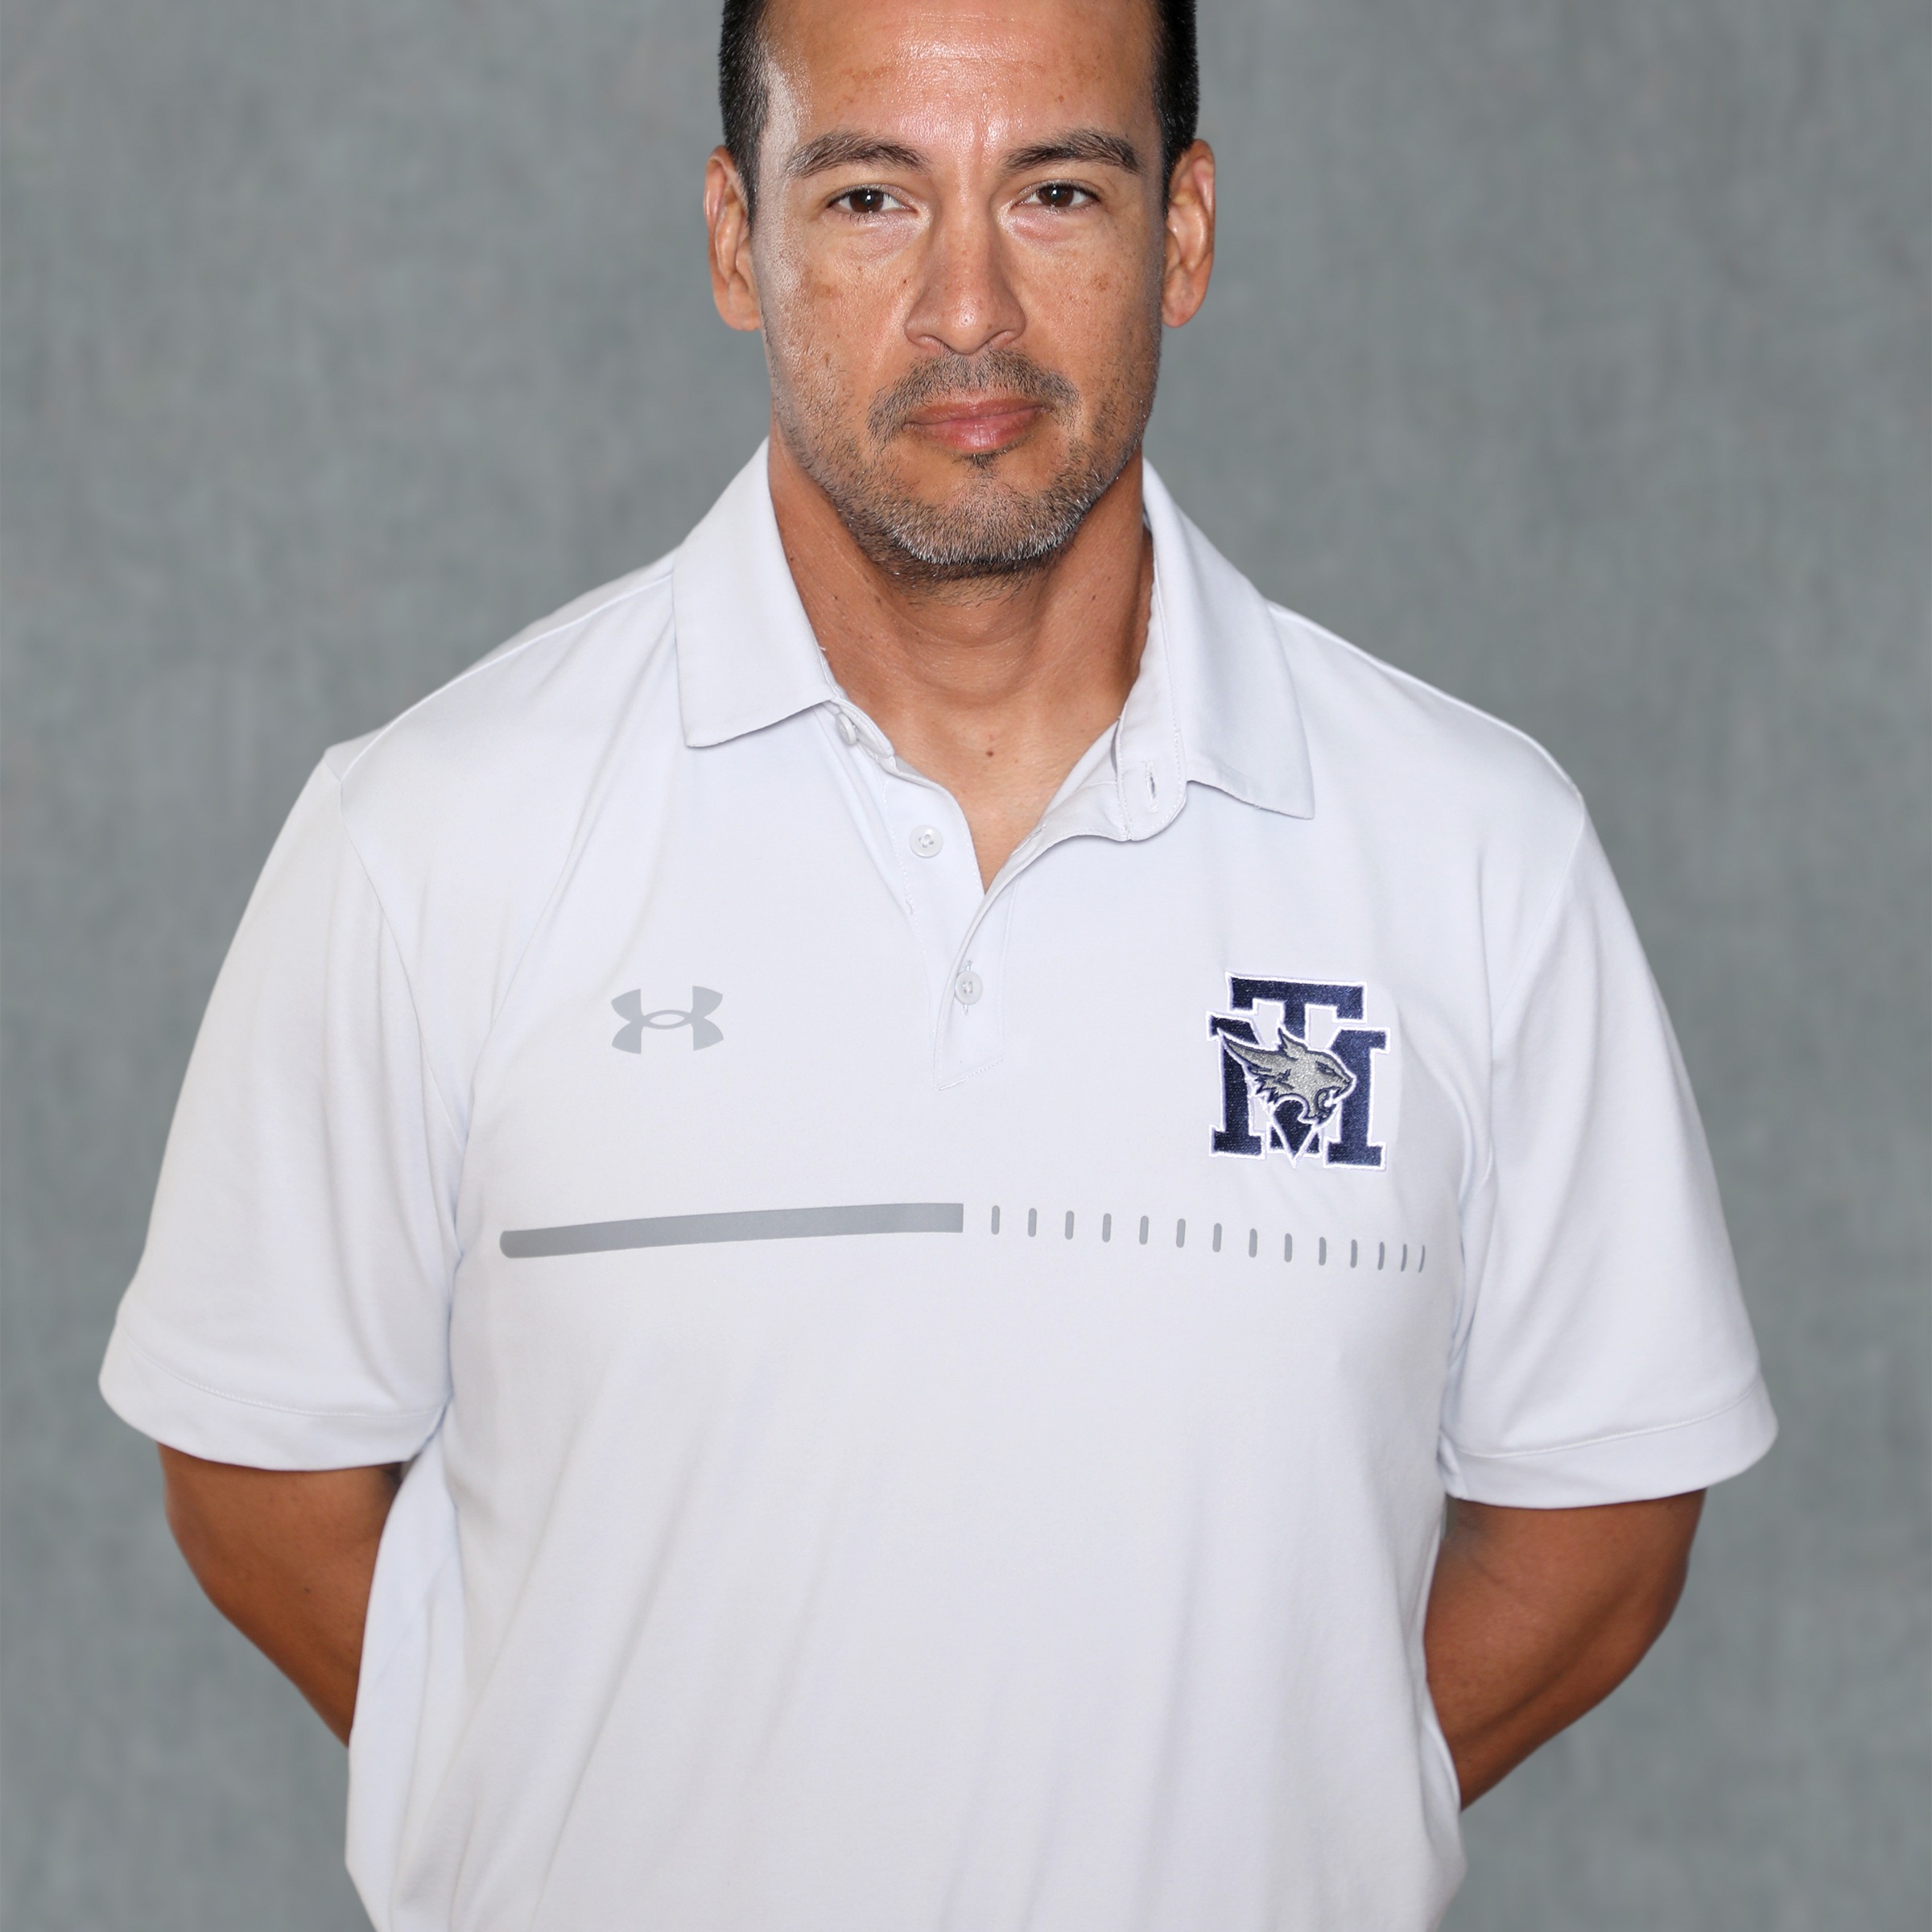 staff photo of Luis Morales